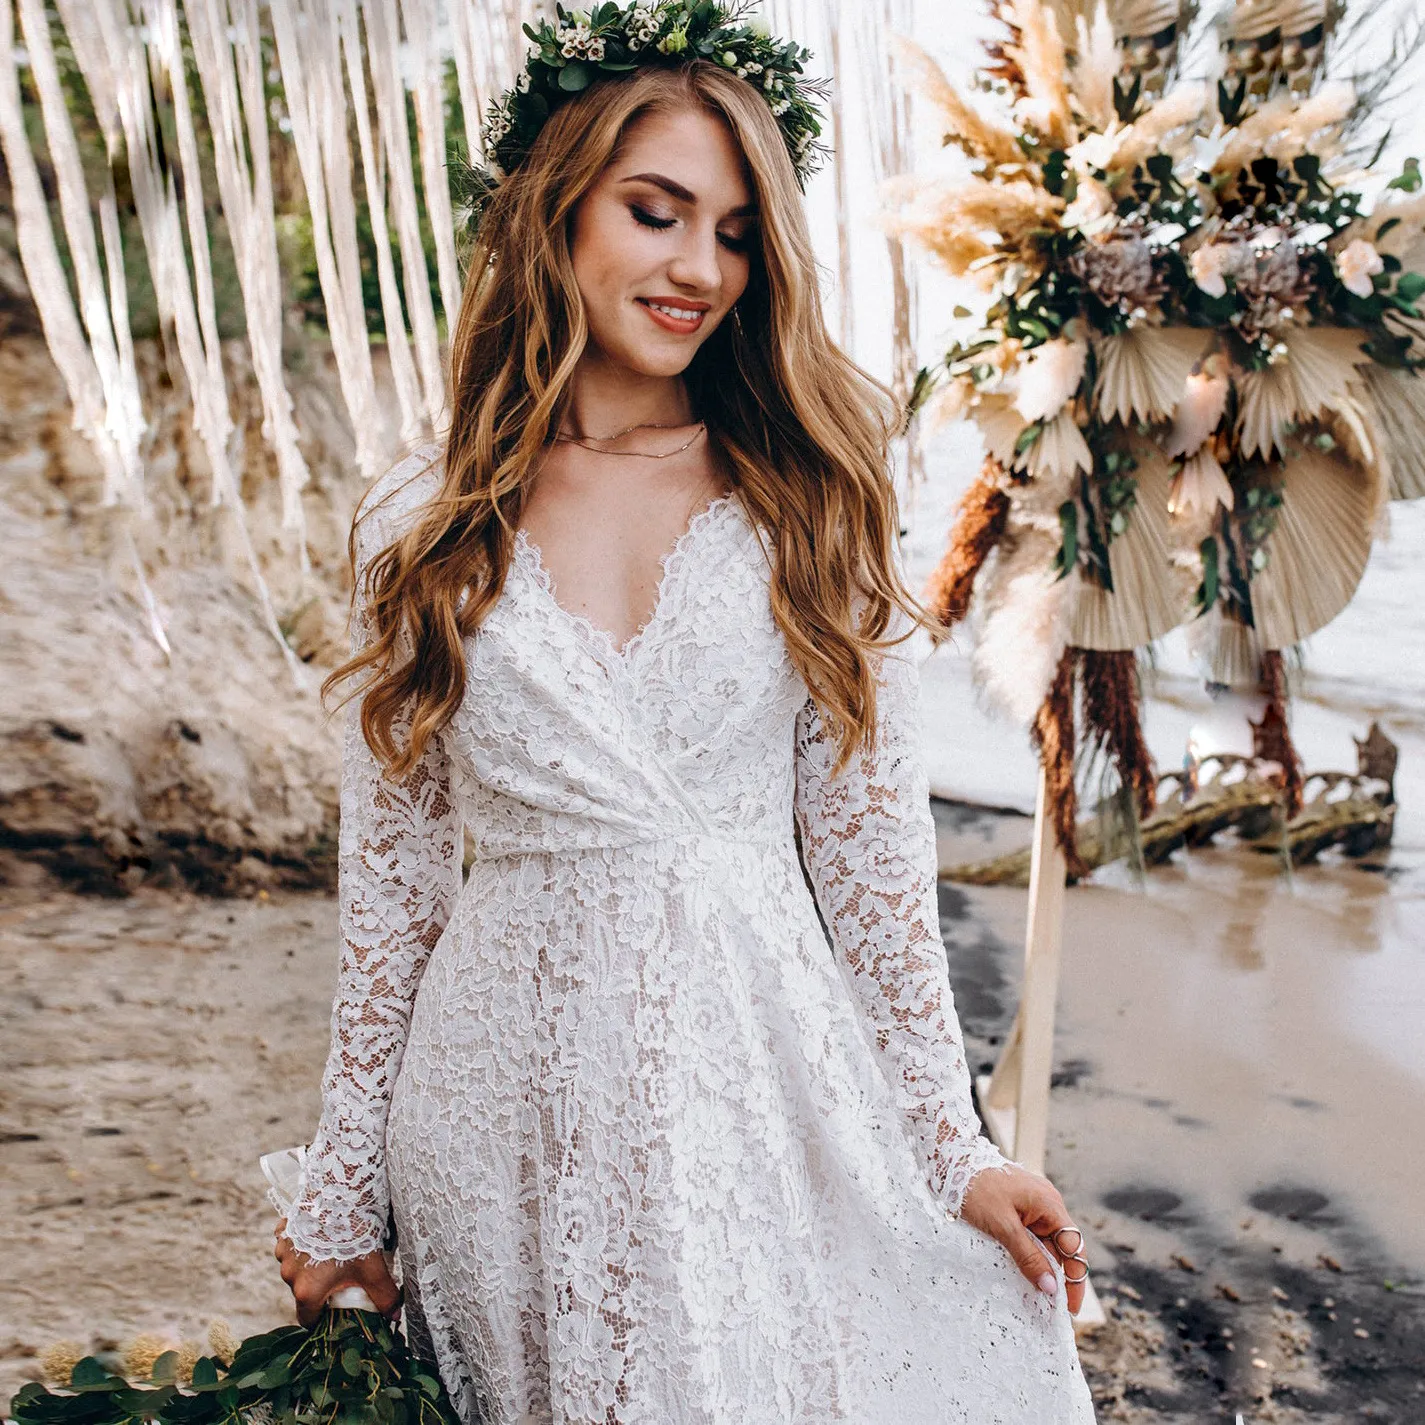 Boho Empire Lace Boho Lace Wedding Dress 2023 With V Neck, Backless Design,  Long Sleeves, And Beach Inspired Style Plus Size Bridal Gown Vestido De  Noiva328U From Baiy31, $38.19